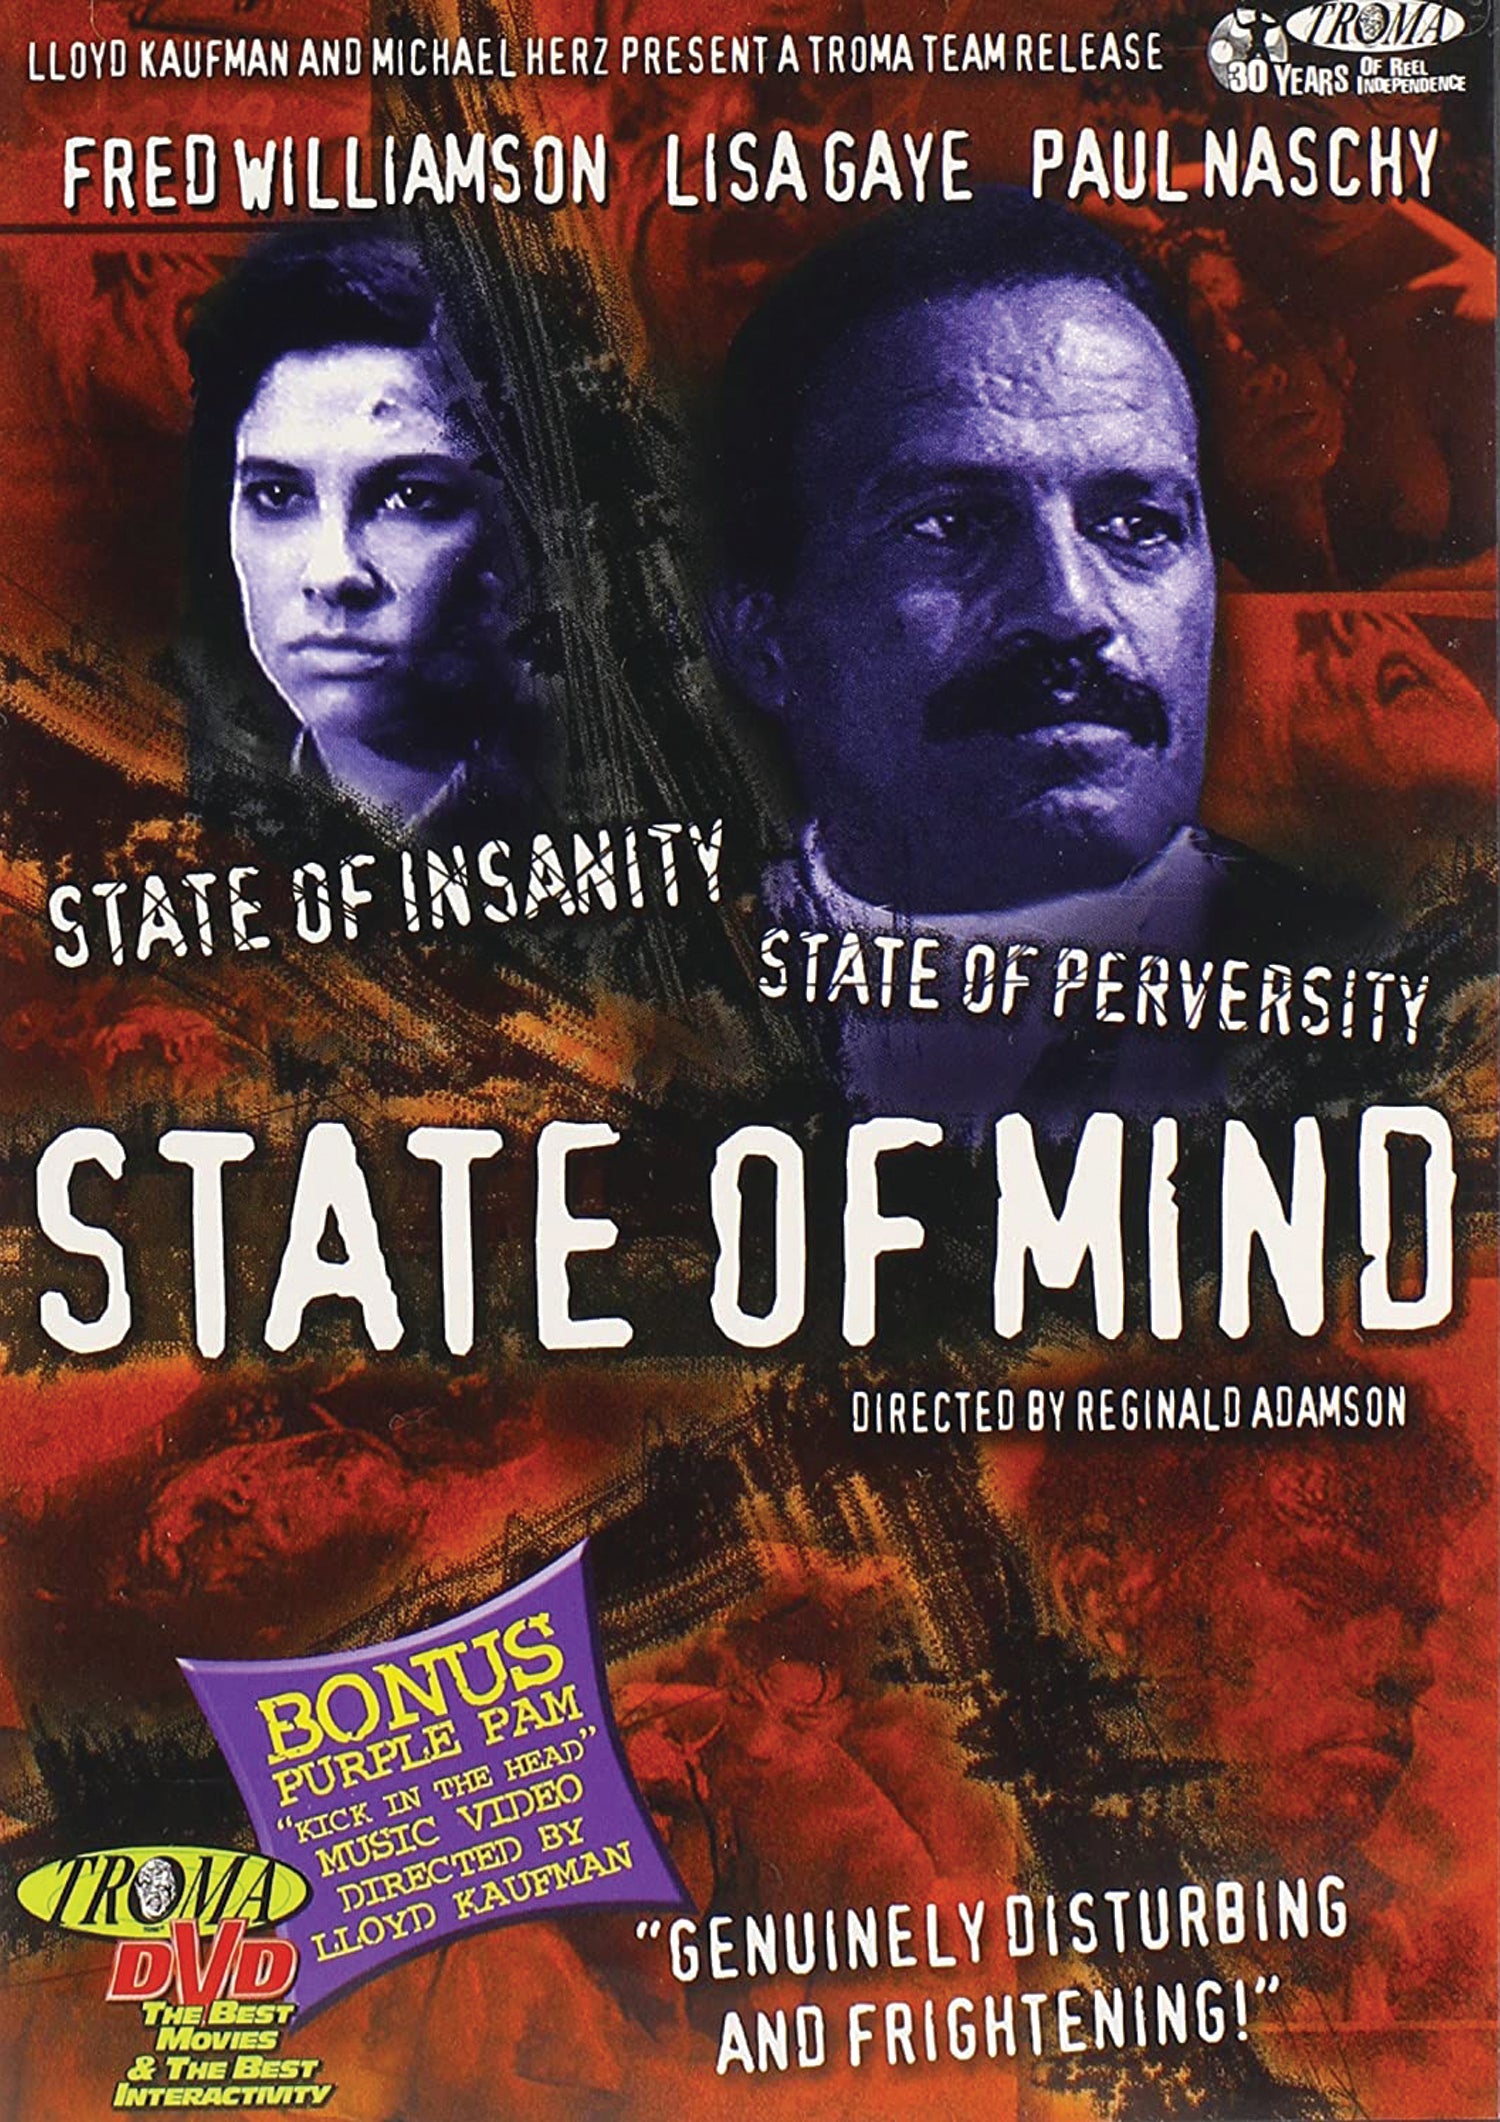 STATE OF MIND DVD